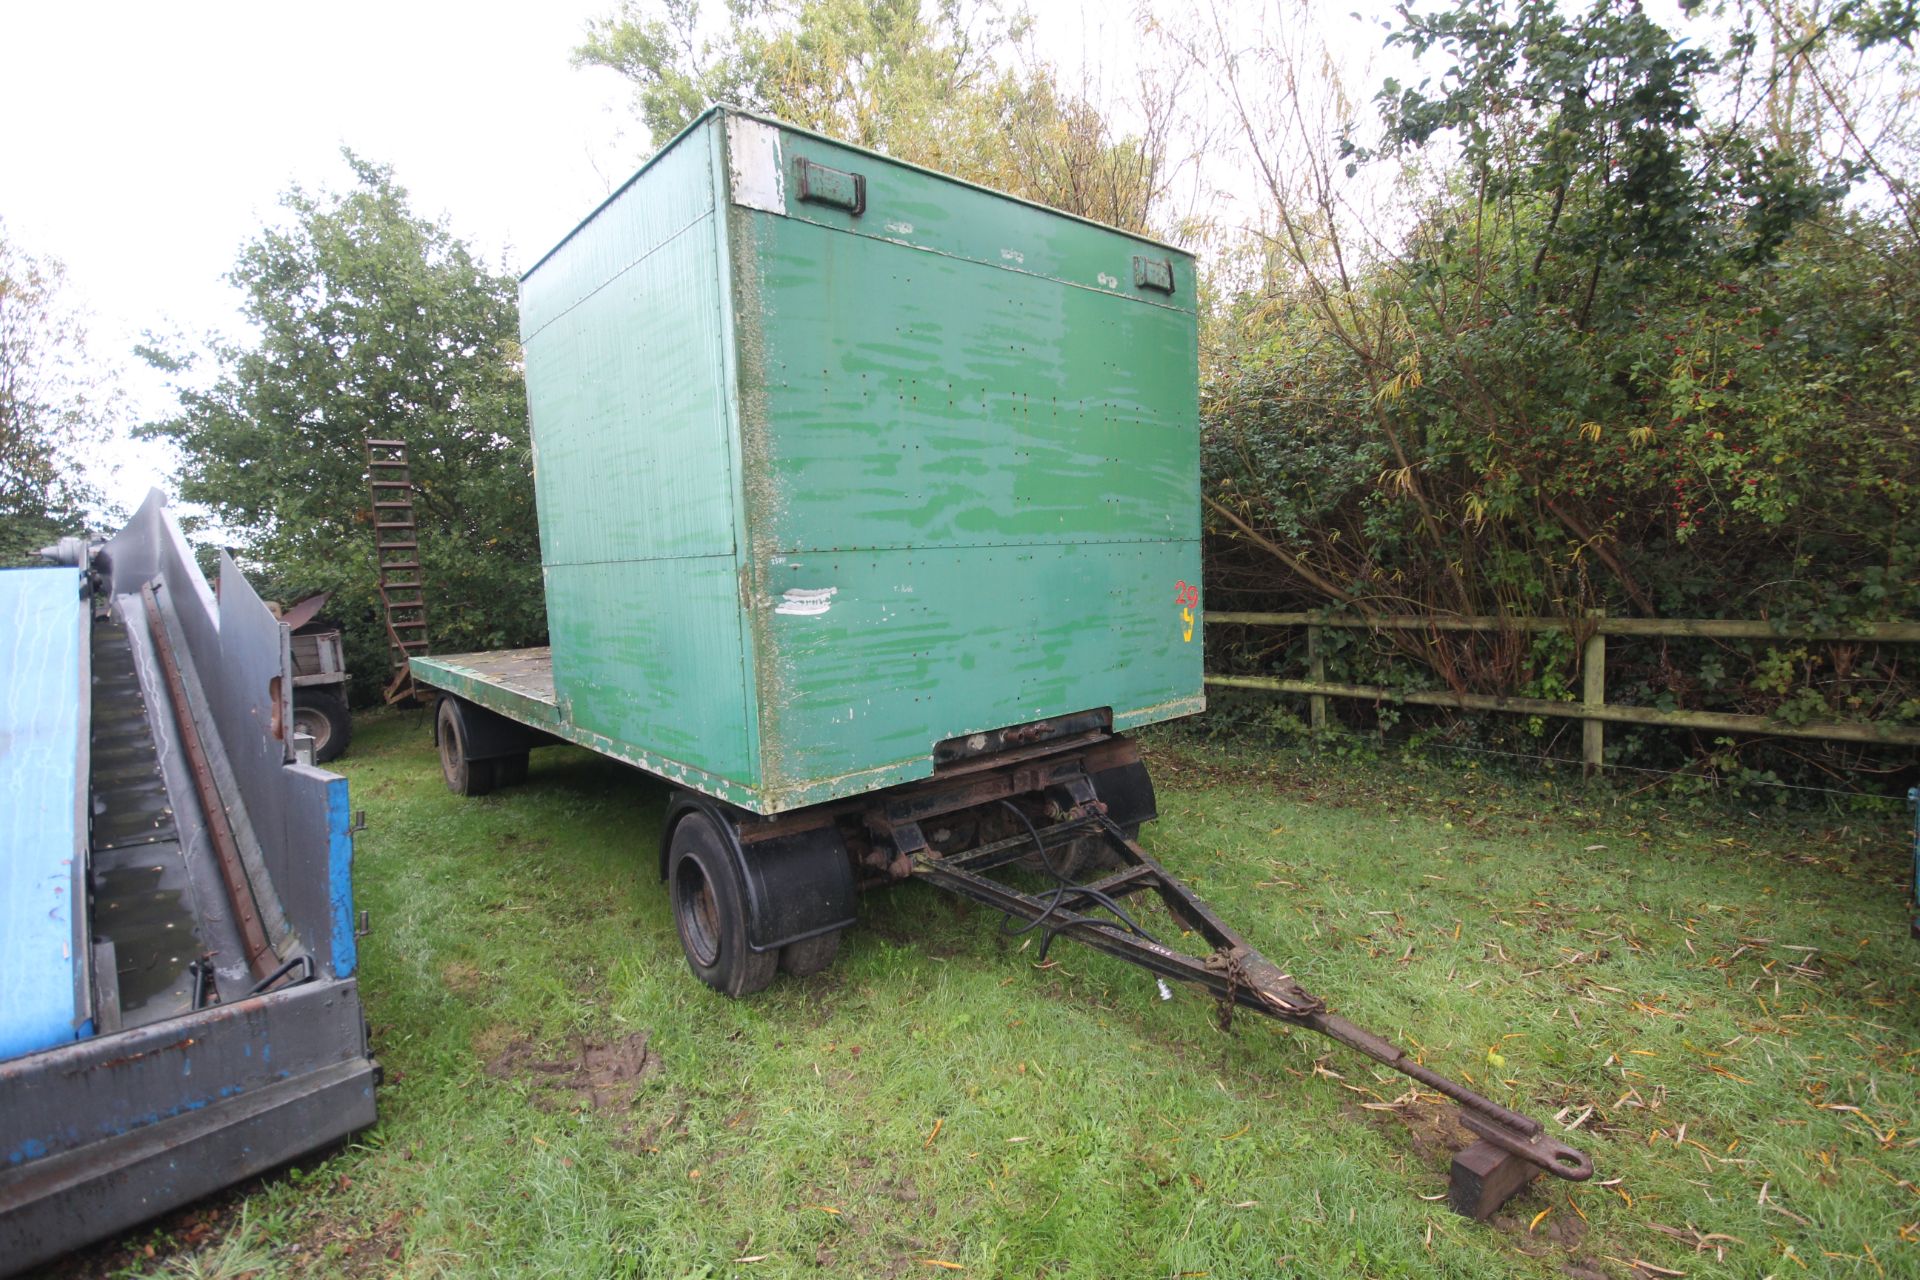 4-wheel turntable beavertail low loader trailer. With Manual ramps and front workshop. V